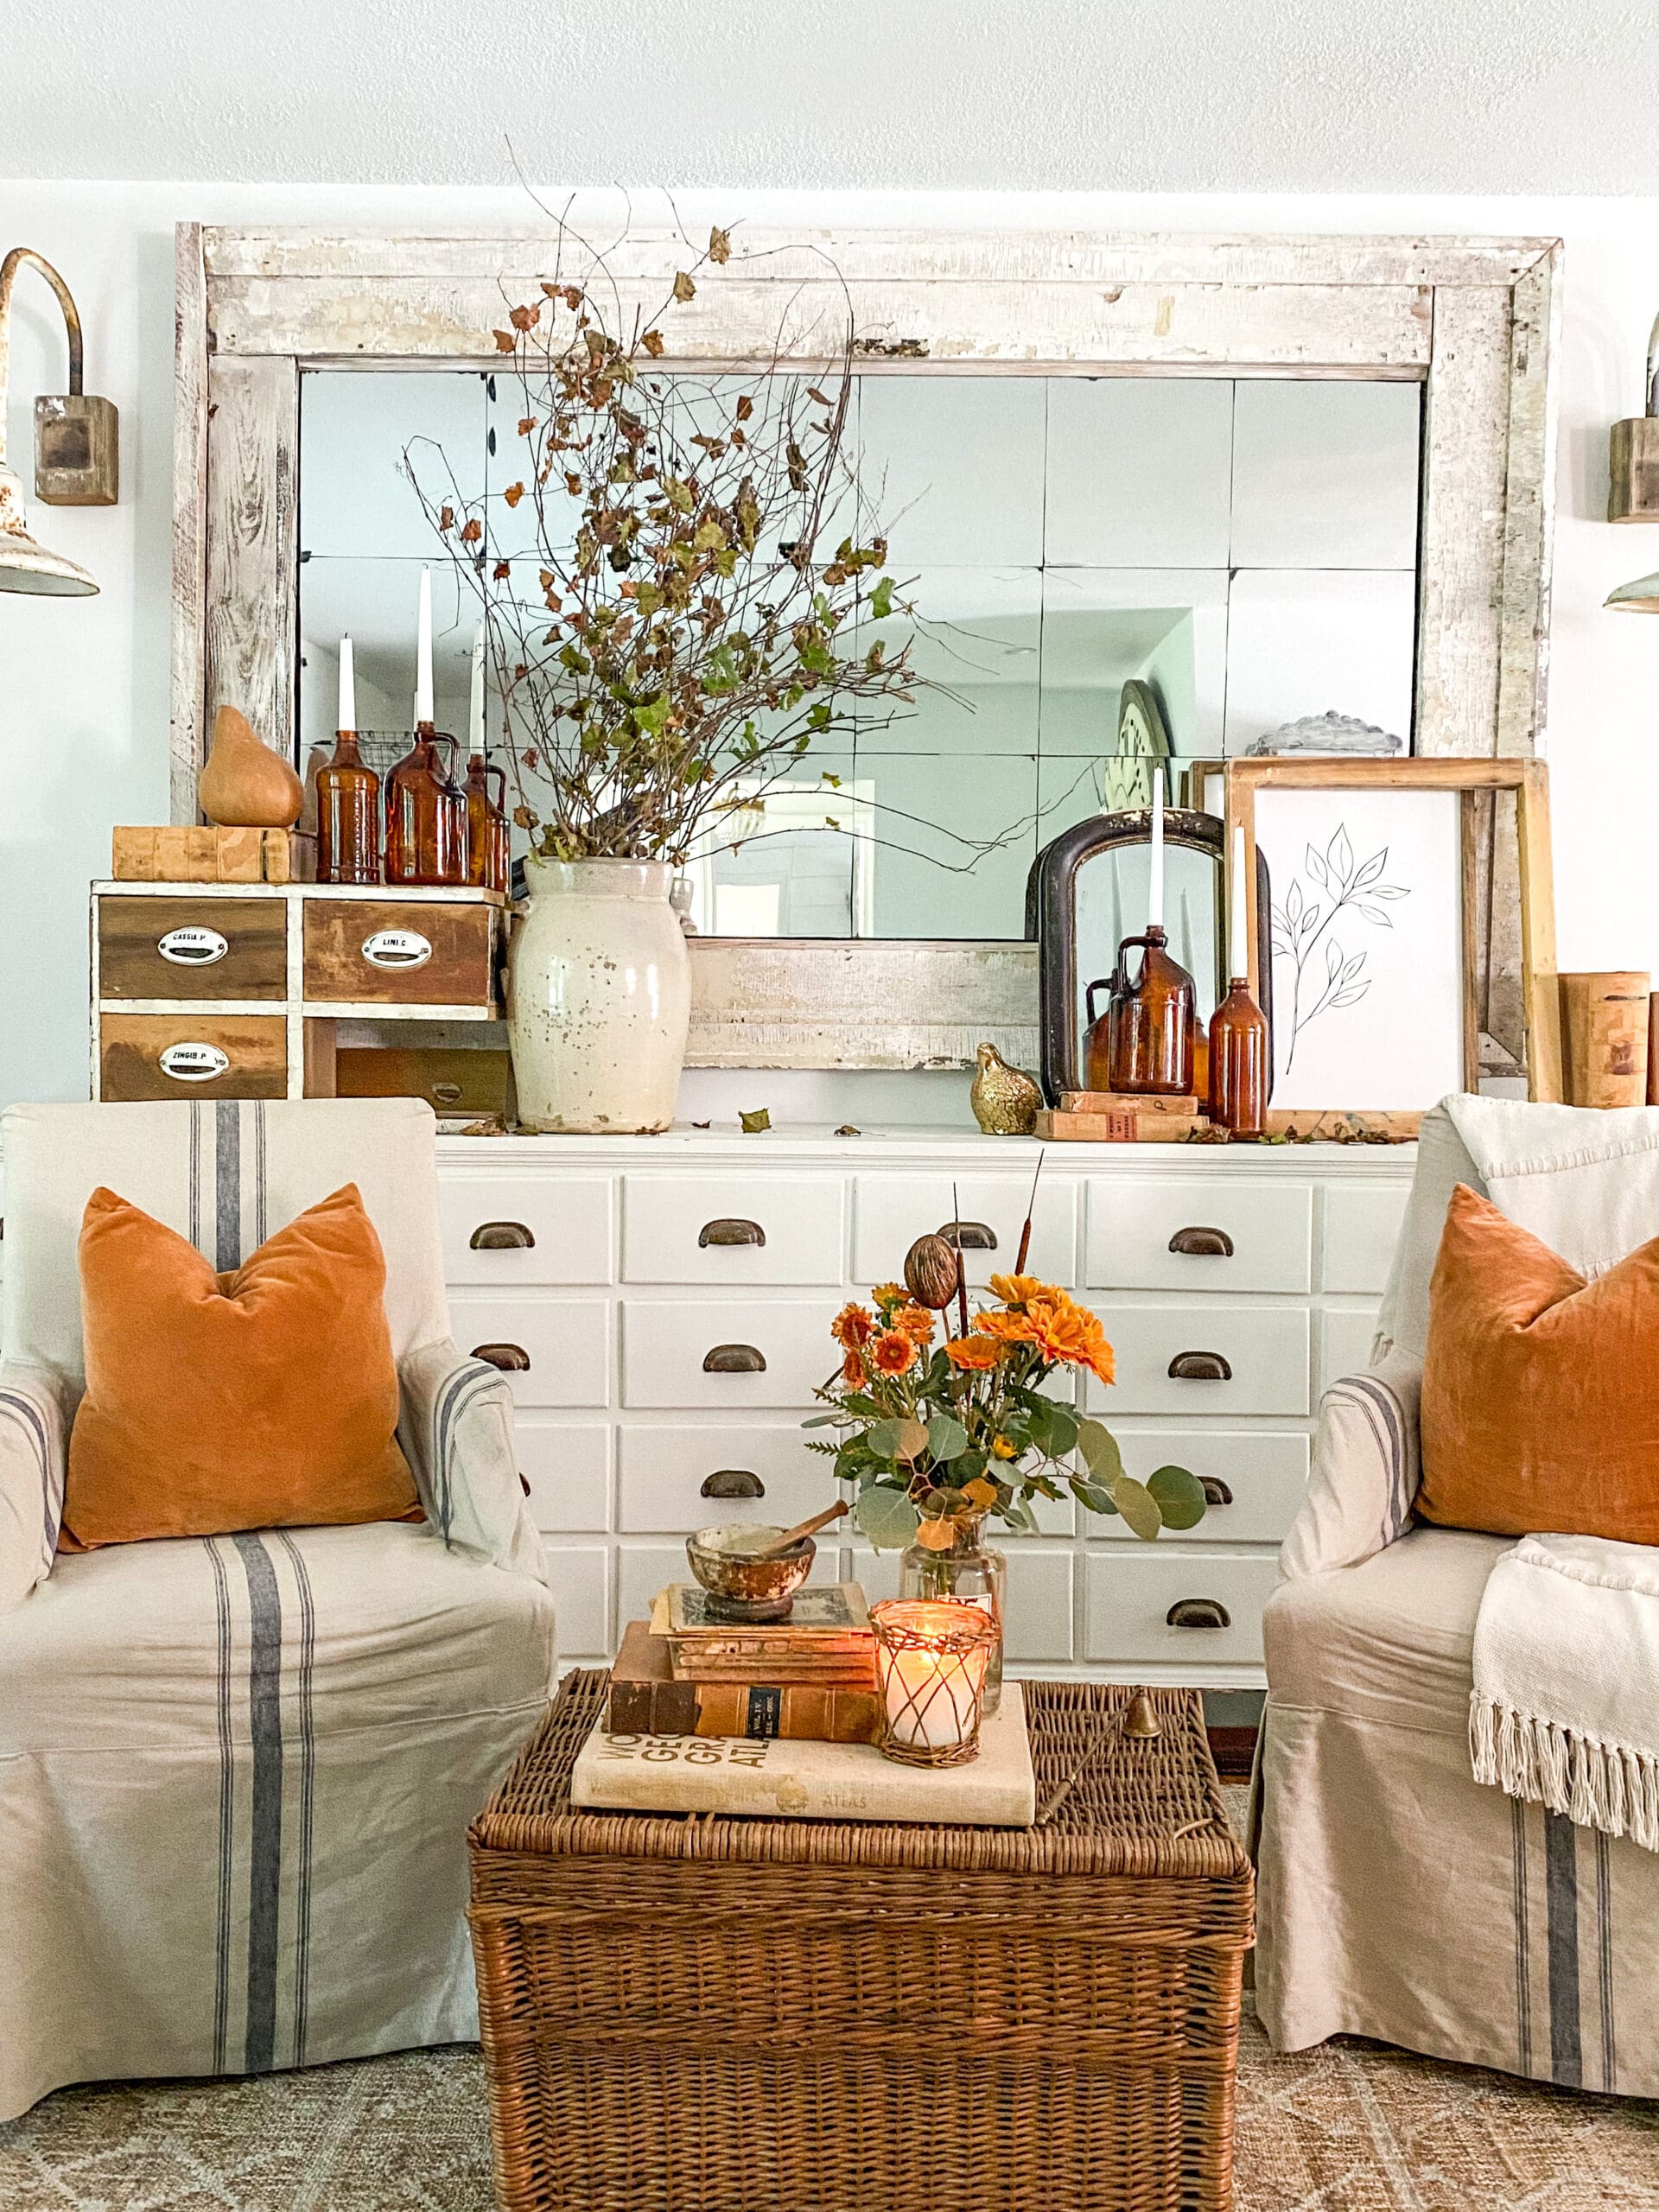 White vintage apothecary, large mirror, and sitting chairs styled for fall with rust tones, vintage frames, and fresh flowers